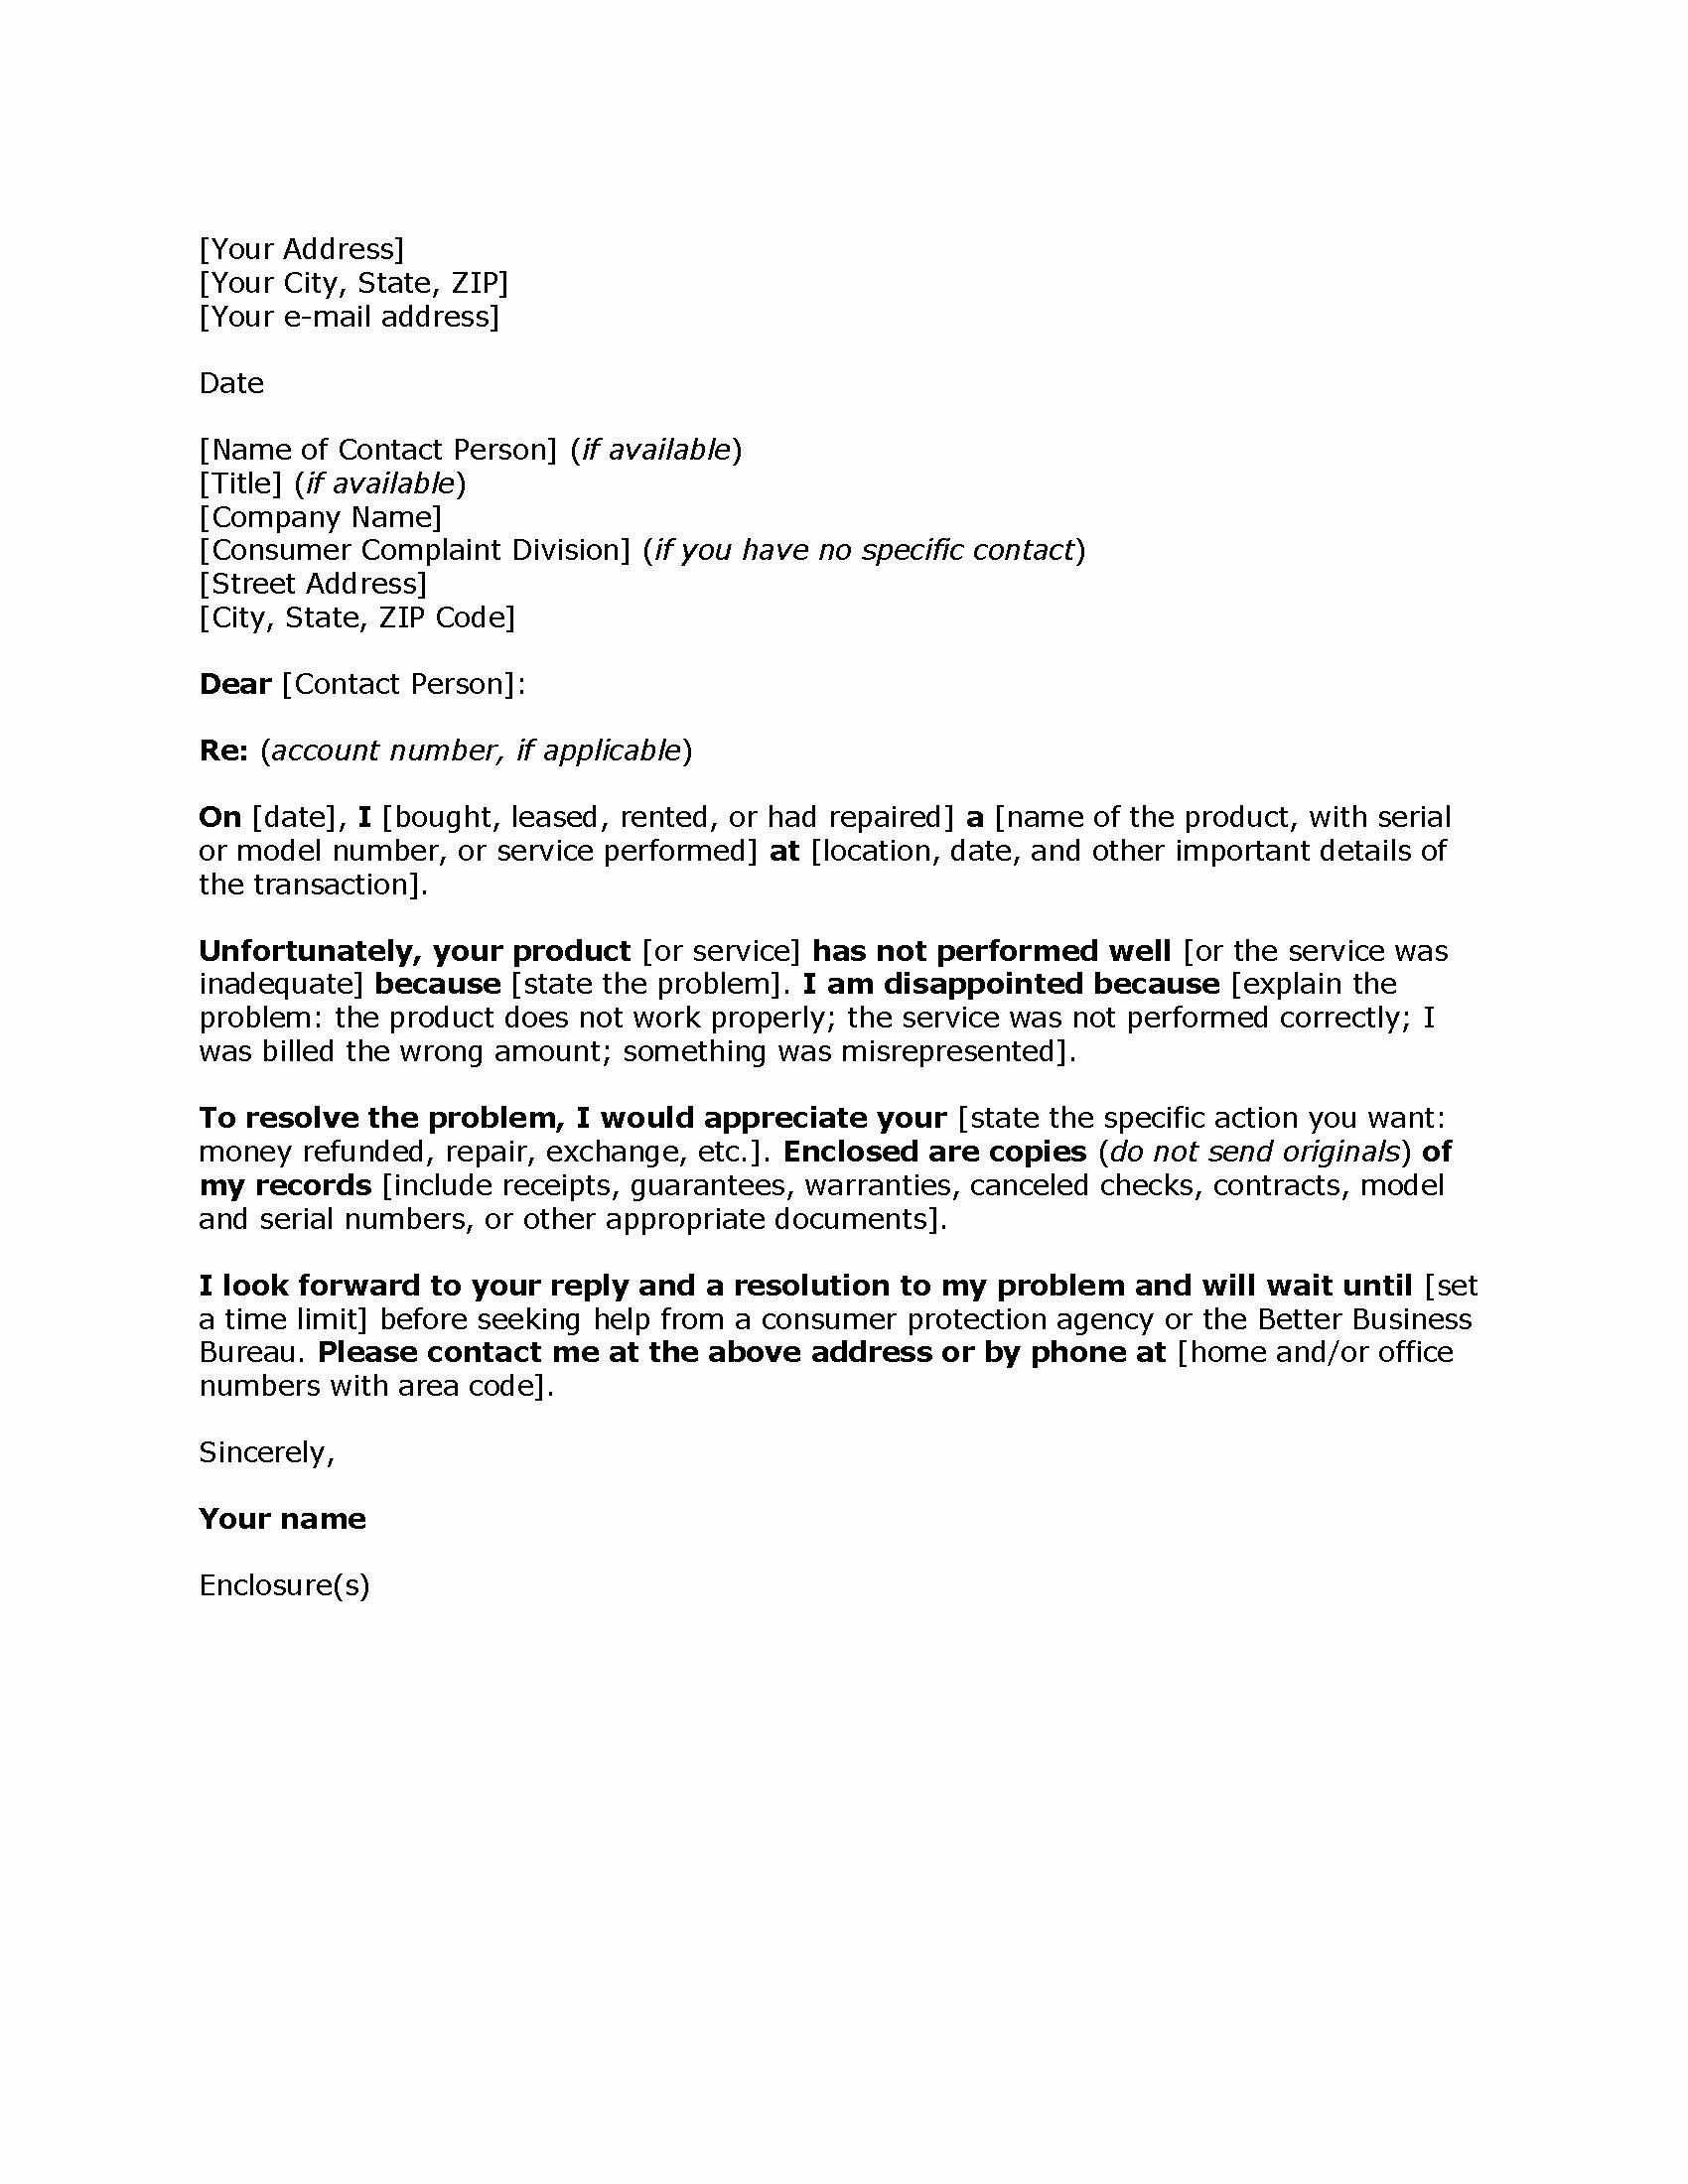 Apartment Noise Complaint Letter Sample Awesome Plaint Letter About Neighbors to Landlord Newletterjdi